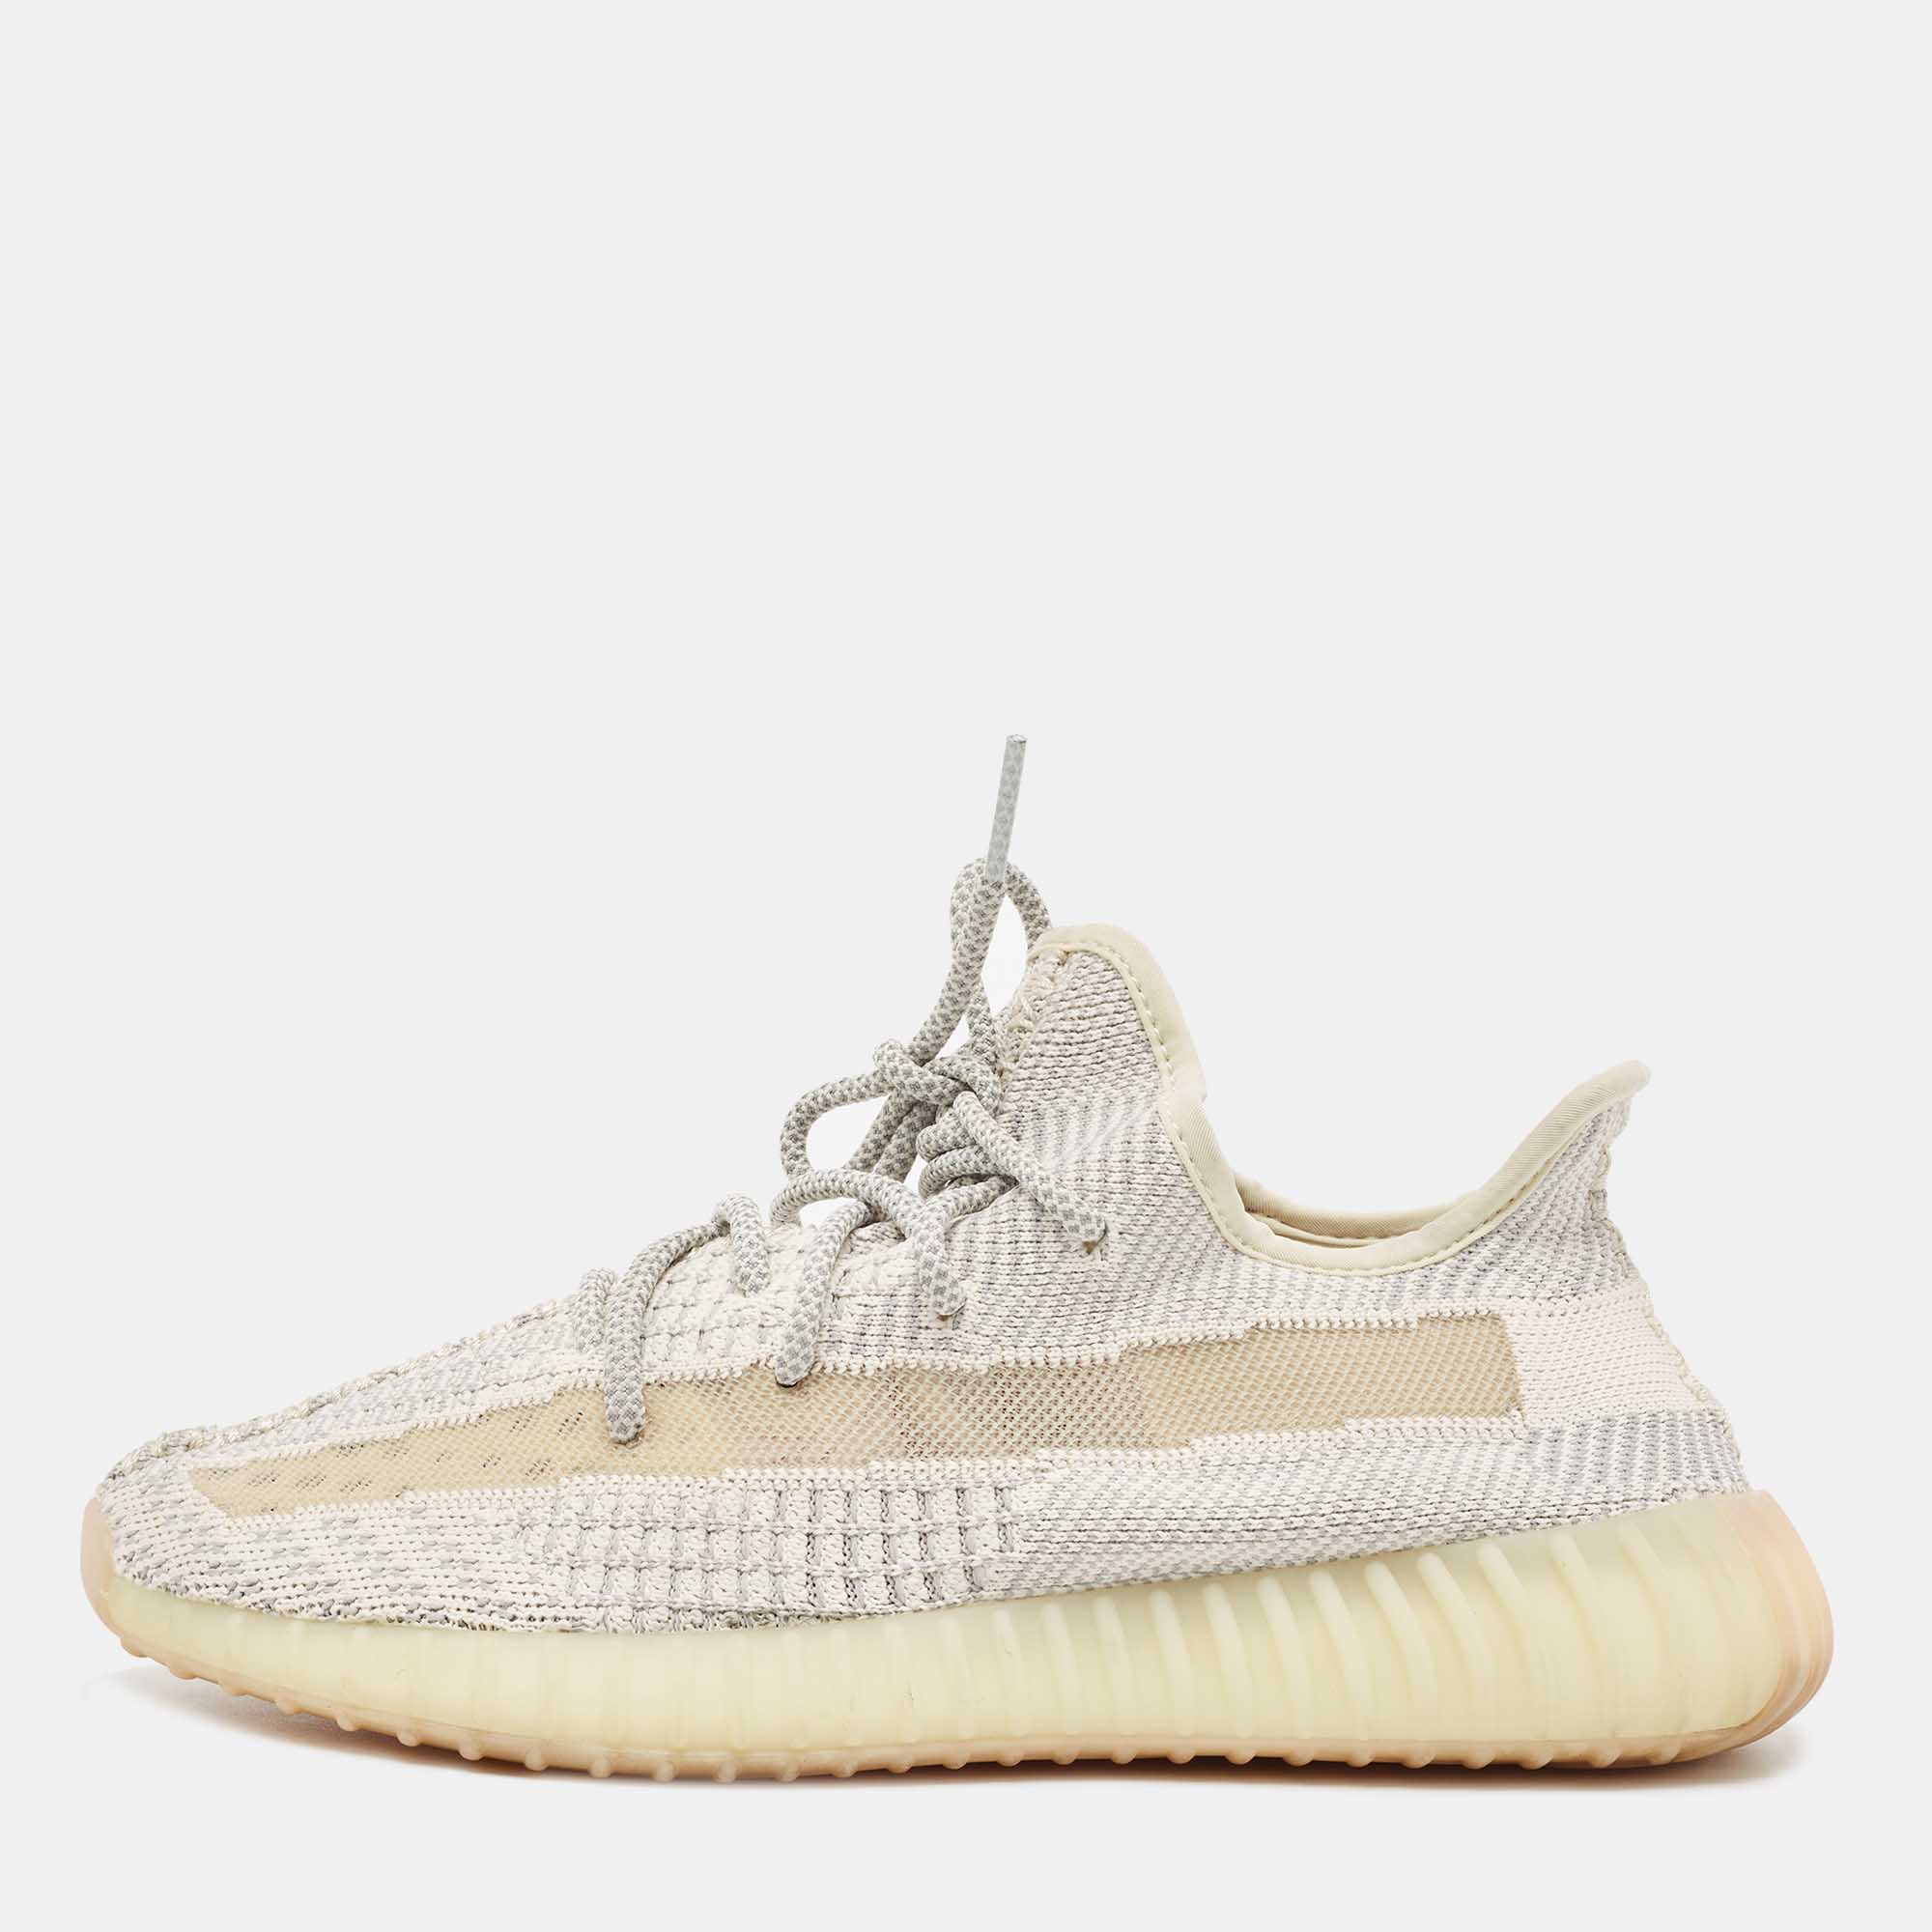 Yeezy x Adidas Two Tone Knit Fabric Boost 350 V2 Lundmark Sneakers Size 41 1/3